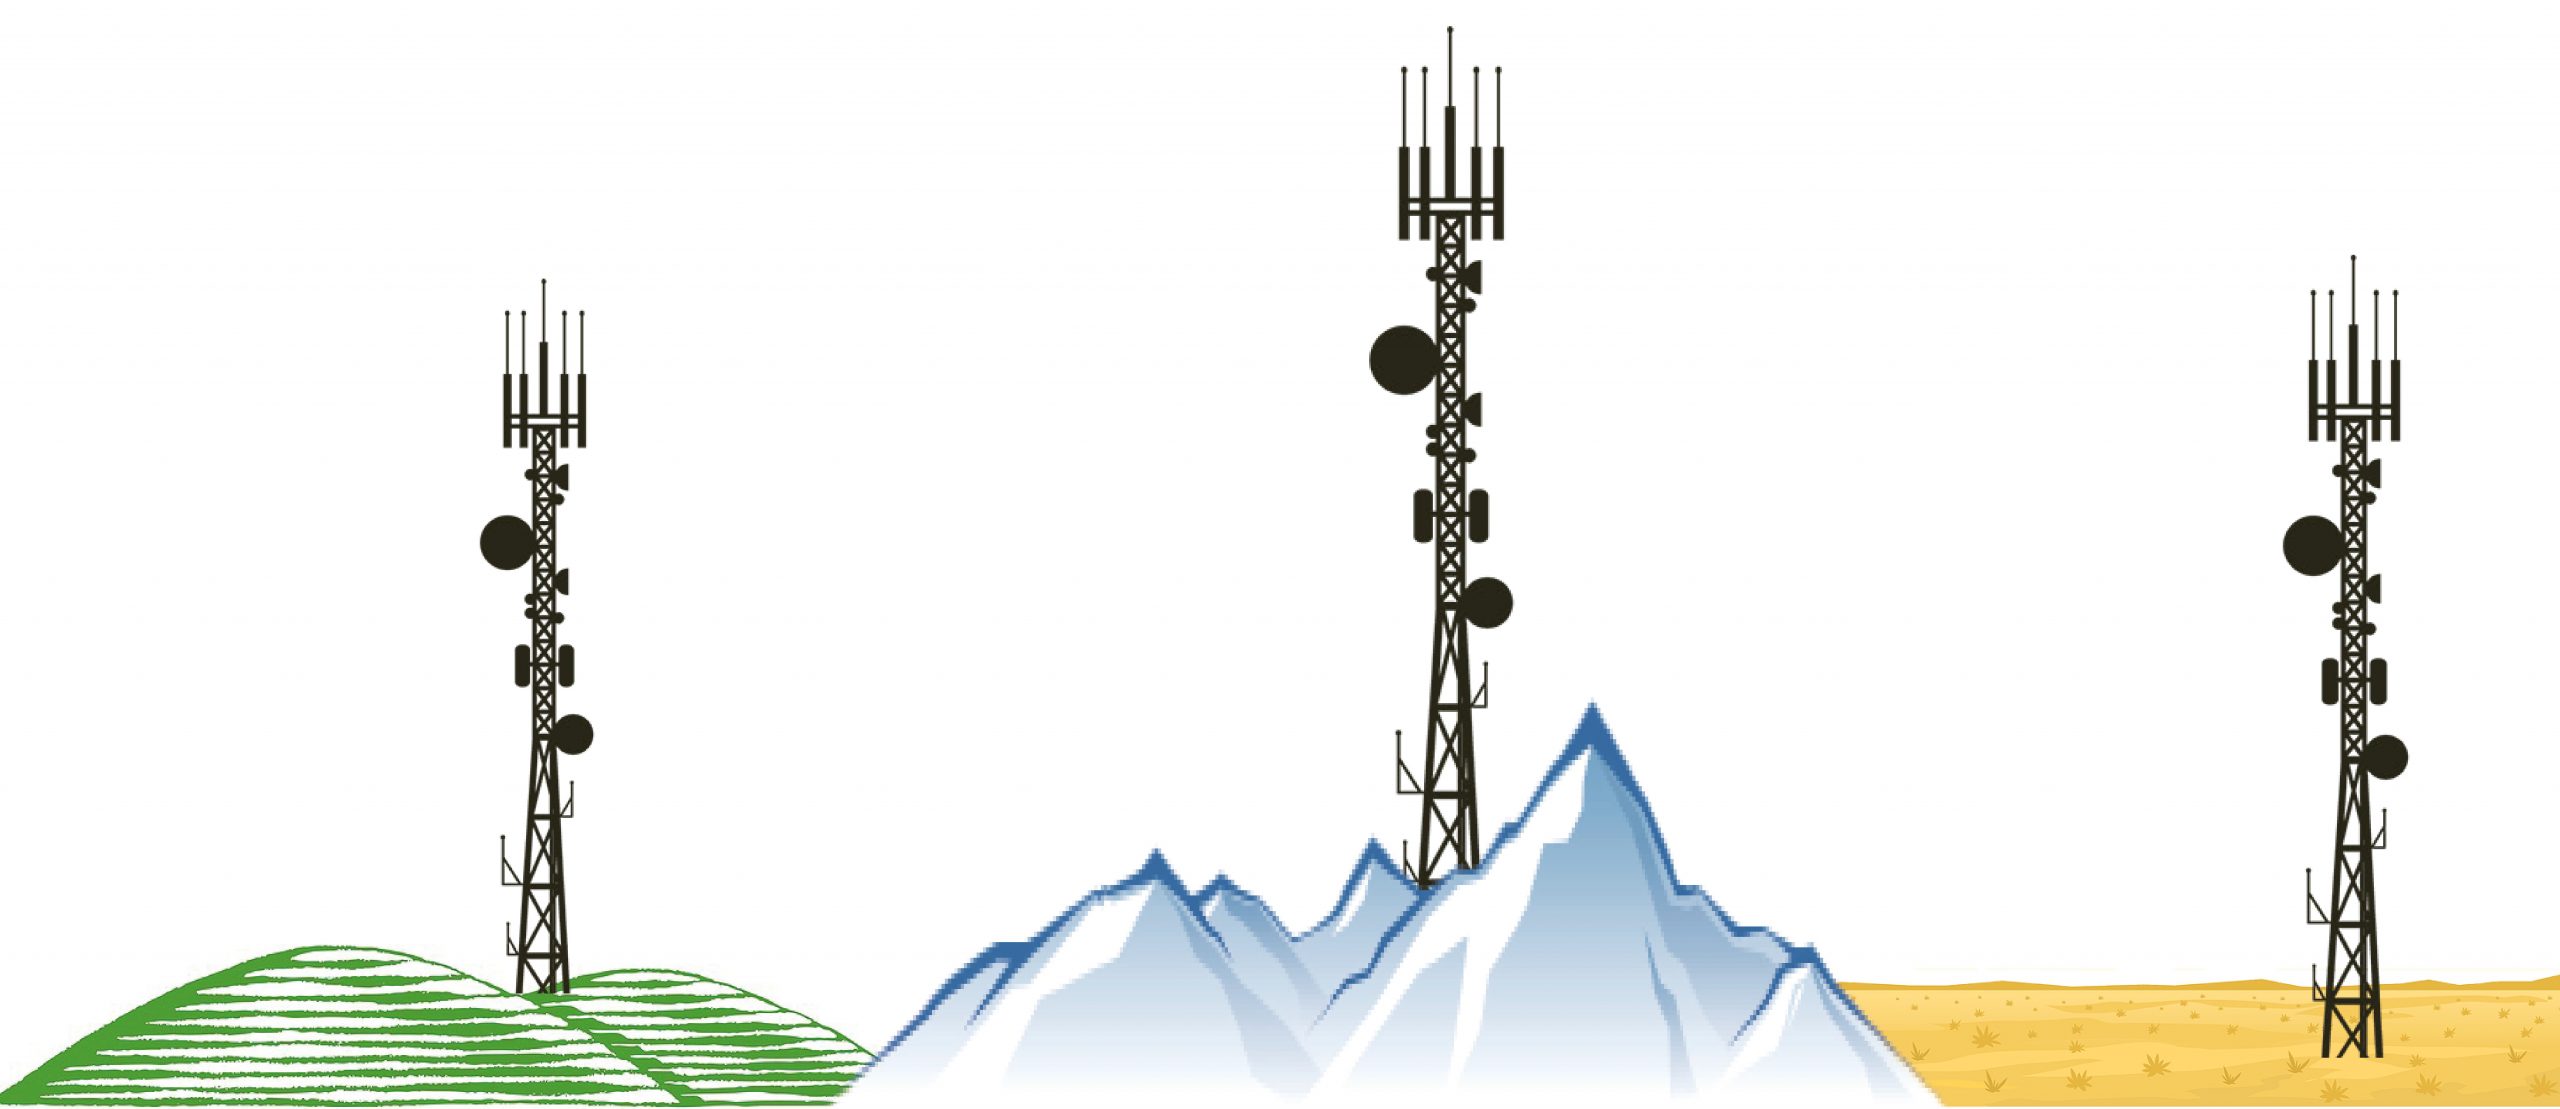 COMINT Spectrum monitoring and signal analysis have many civilian and defense application areas.